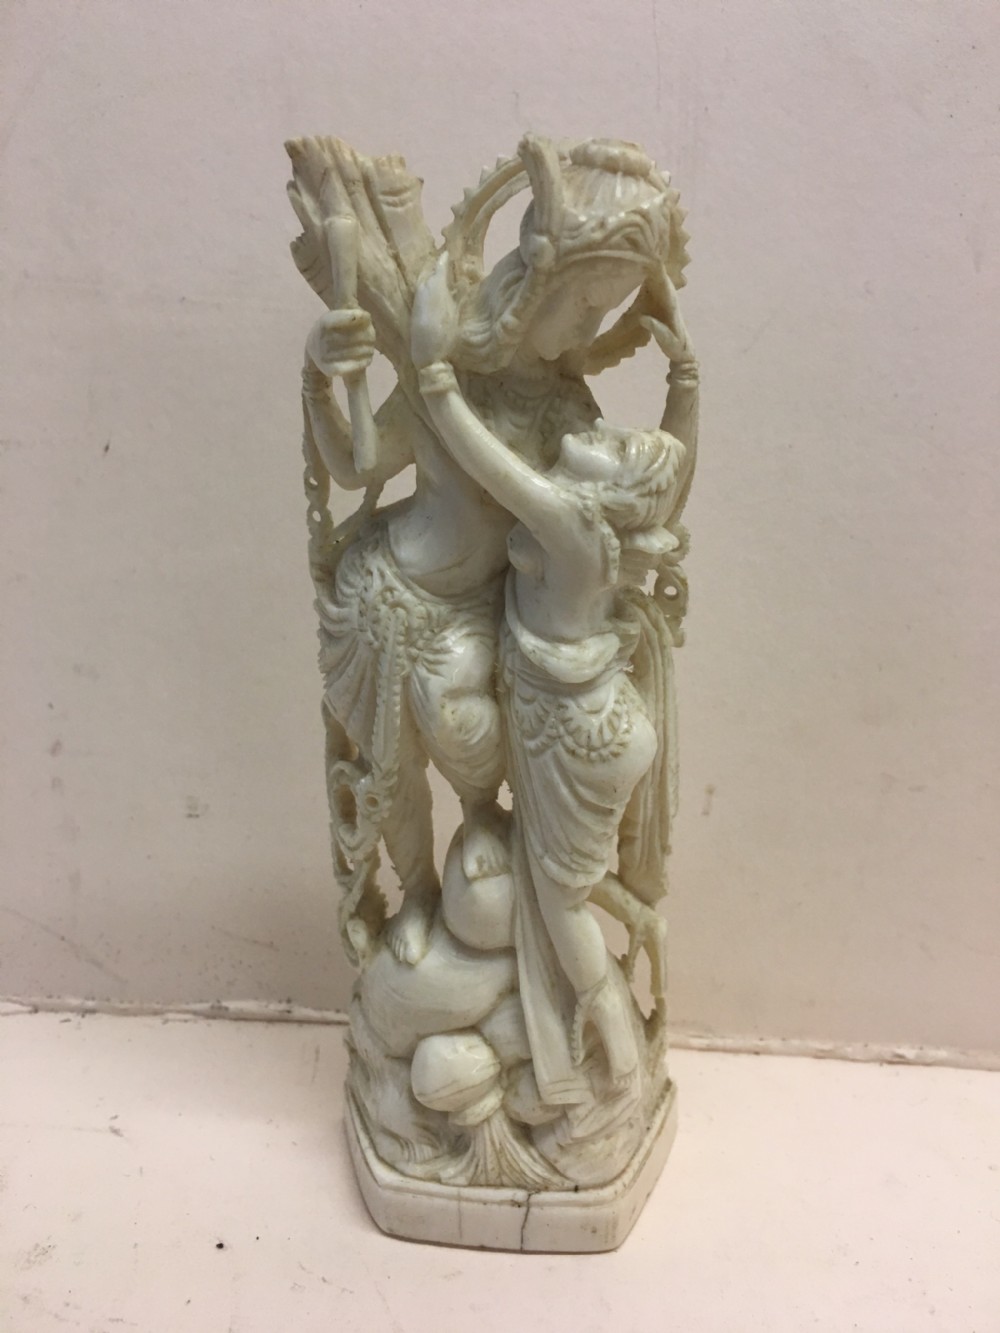 edwardian period ivory carving of a couple embracing